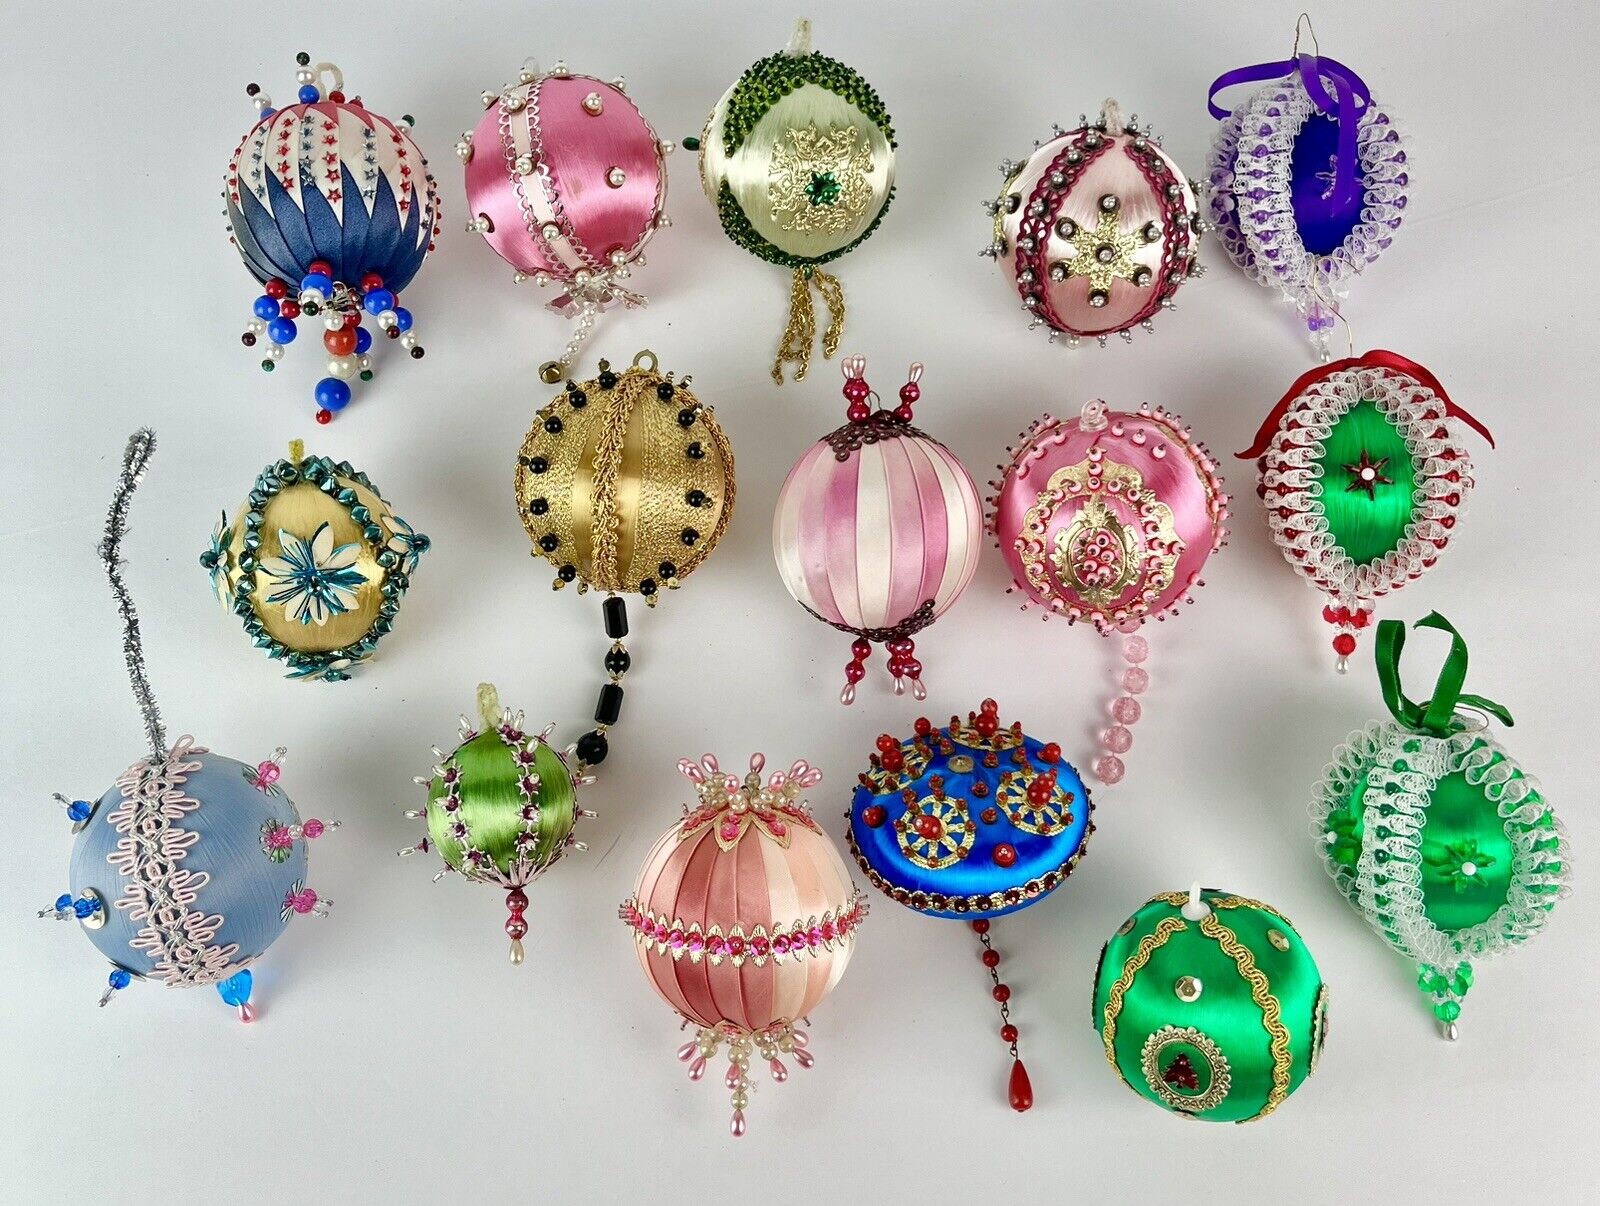 16 Vintage Push Pin Sequin Satin Ribbon Beaded Handcrafted Christmas Ornament